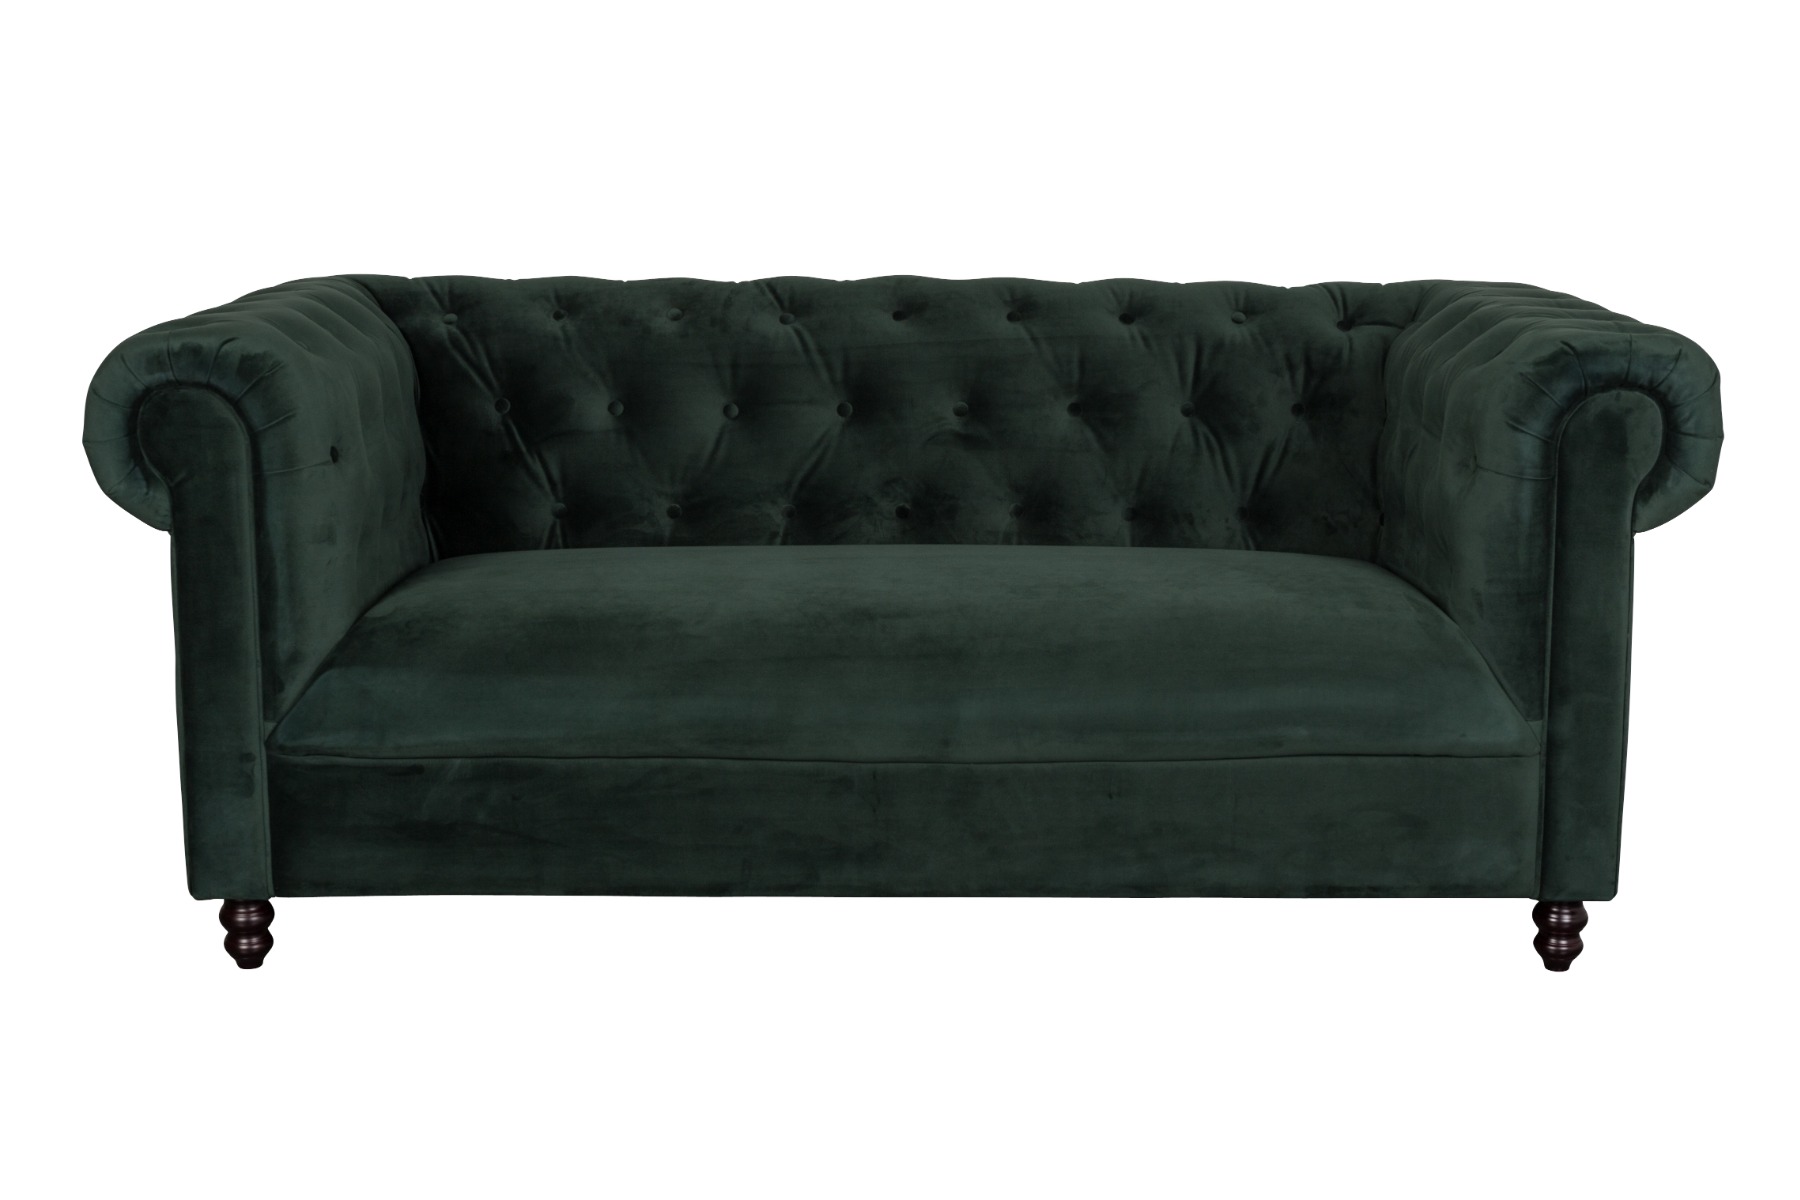 Chester 2 Seater Sofa in Green